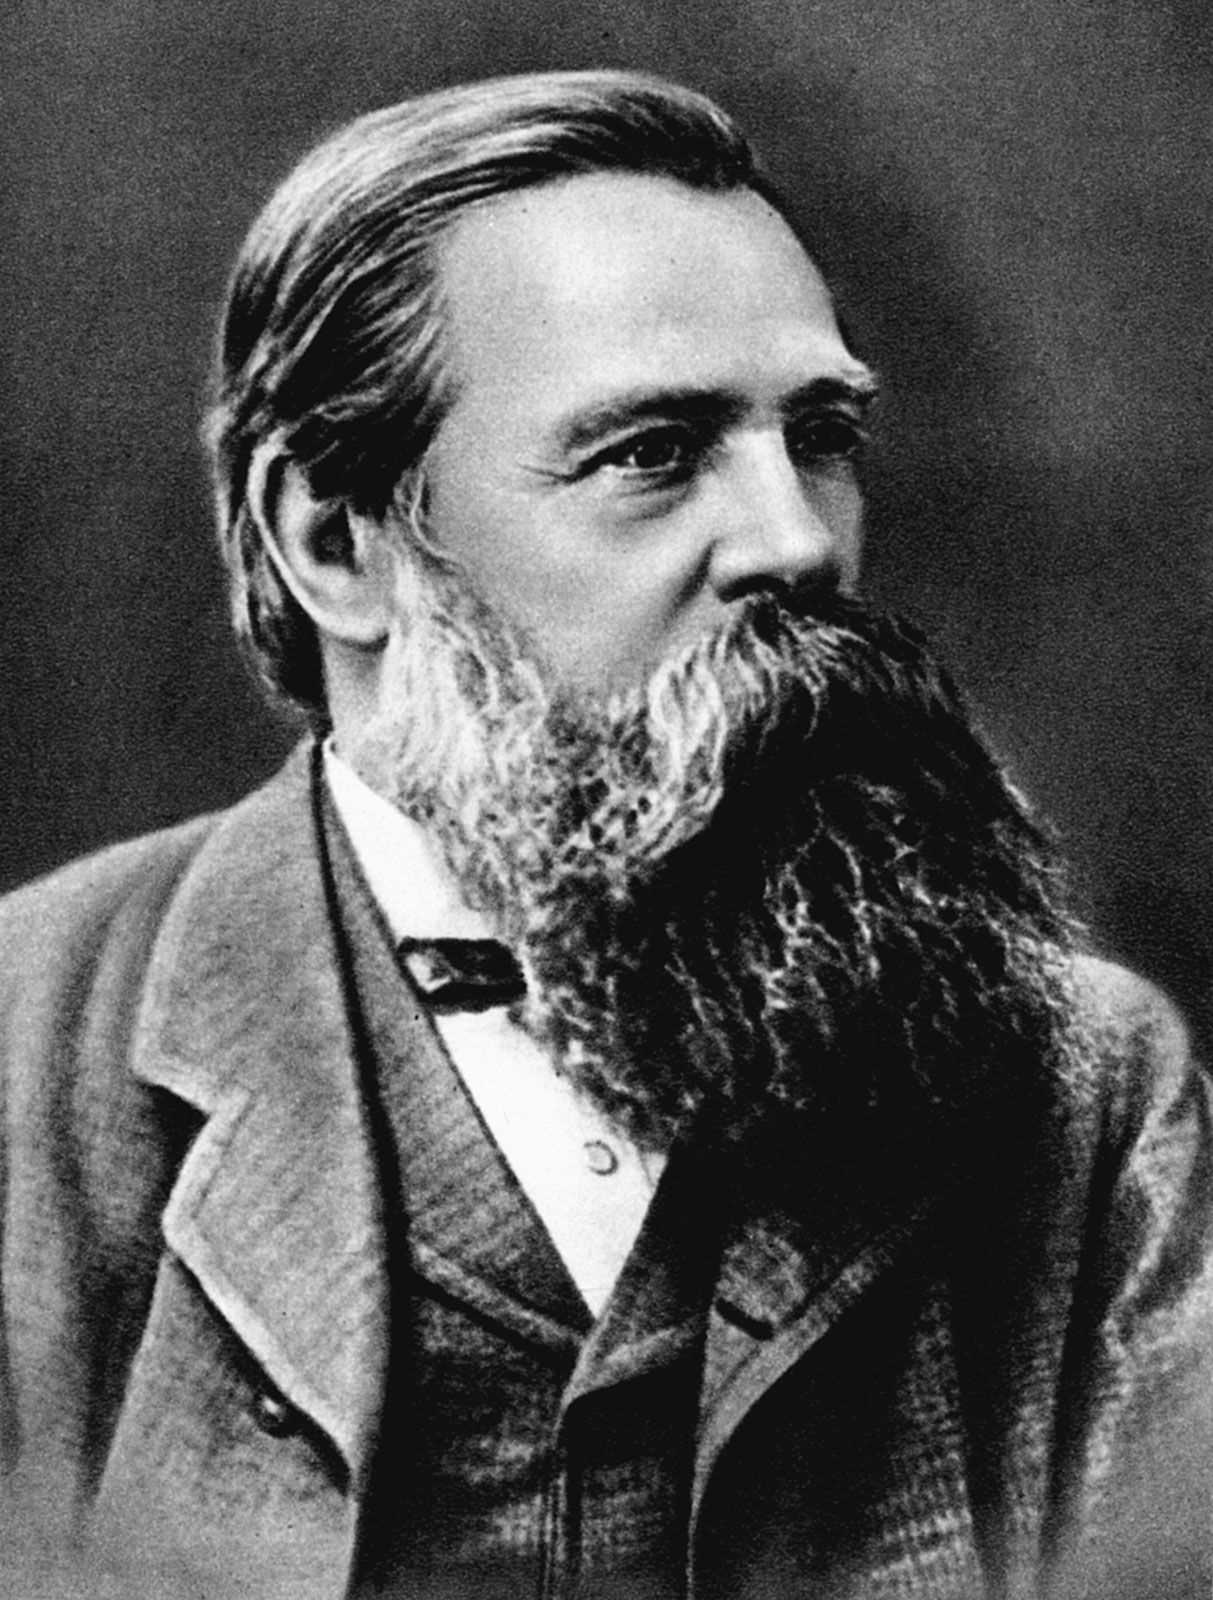 Early Life and Education of Friedrich Engels